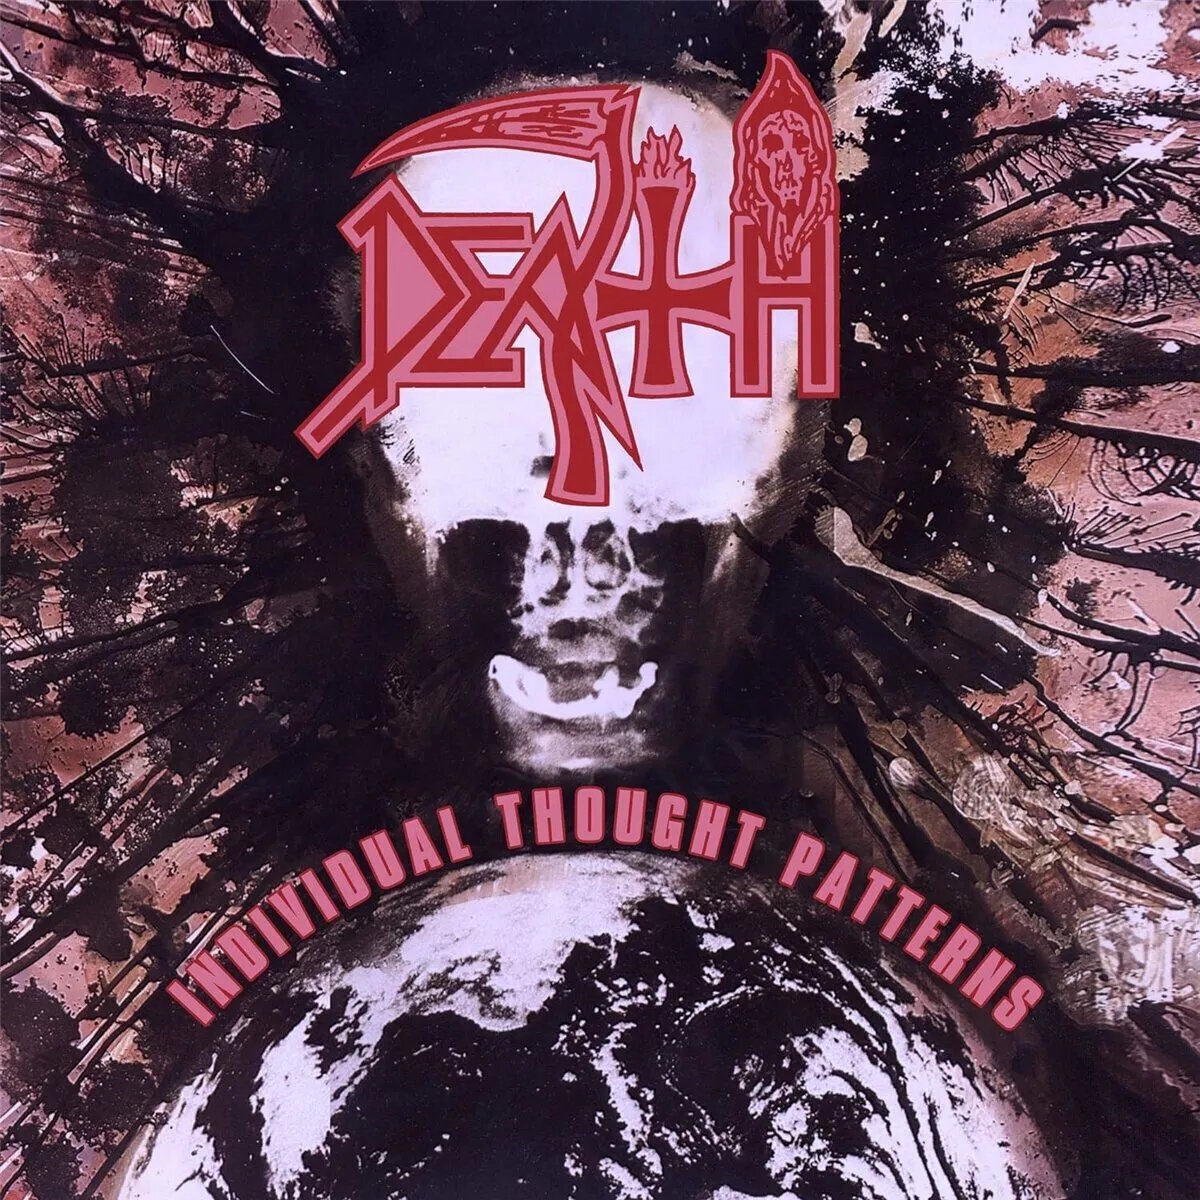 Schallplatte Death - Individual Thought Patterns (Tri Colour Merge Splatter Coloured) (Deluxe Edition) (Limited Edition) (Reissue) (Remastered) (LP)